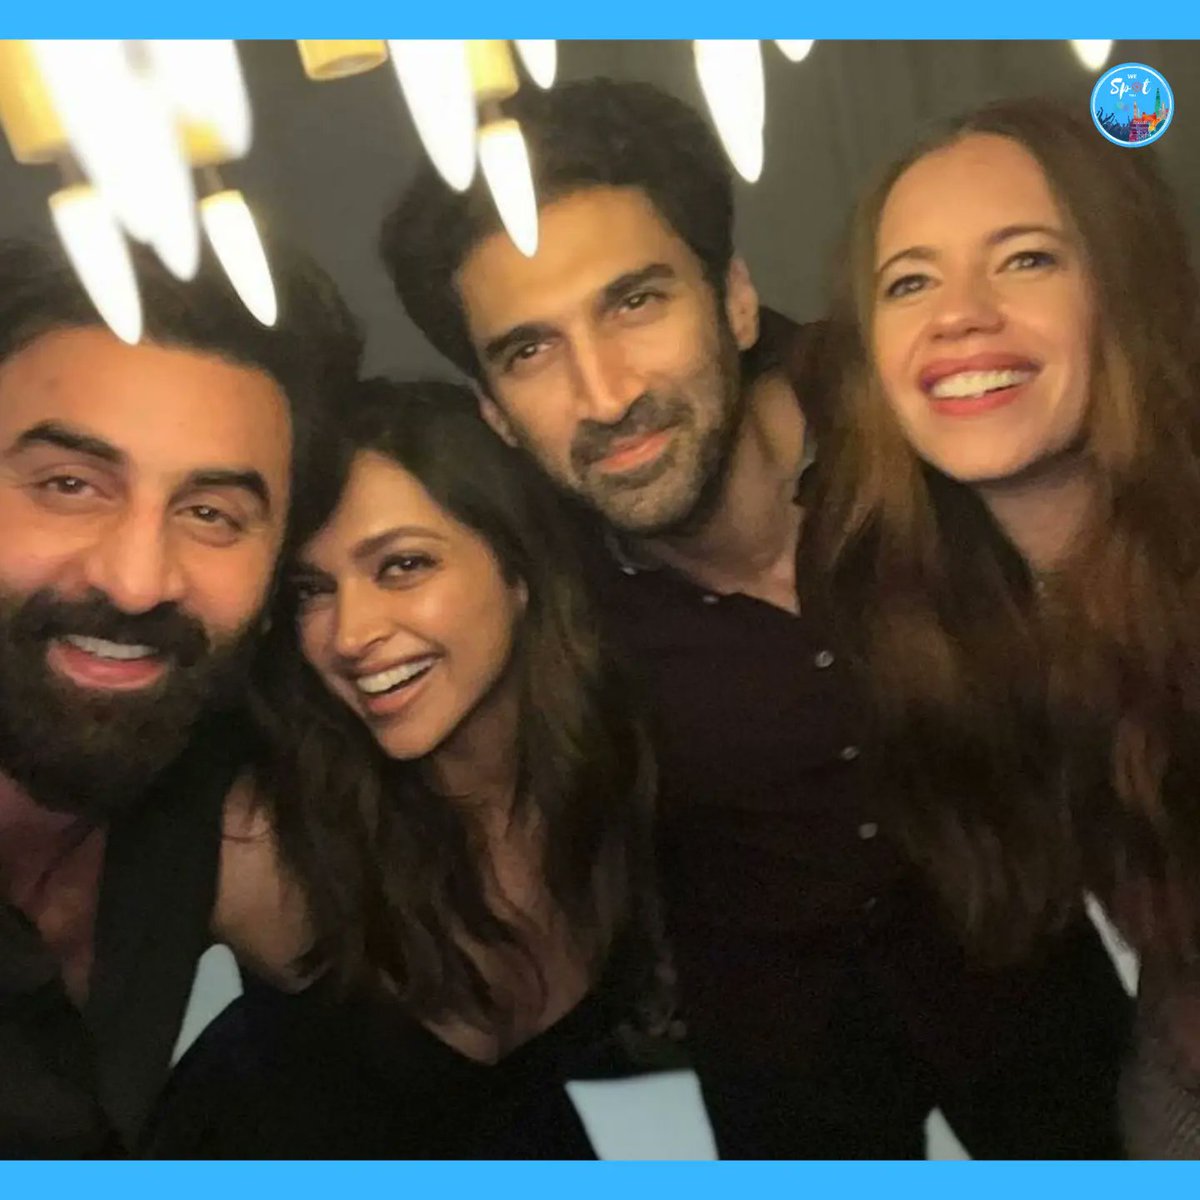 On 31 May, Ayan Mukerji's omantic comedy-drama, Yeh Jawaani Hai Deewani, completed 10 years.
To mark the special occasion, the film's cast and crew reunited for a celebration. 

#yehjawaanihaideewani
#ayanmukerji #10yearsofyehjaawanihaideewani #wespotyou #bollywood